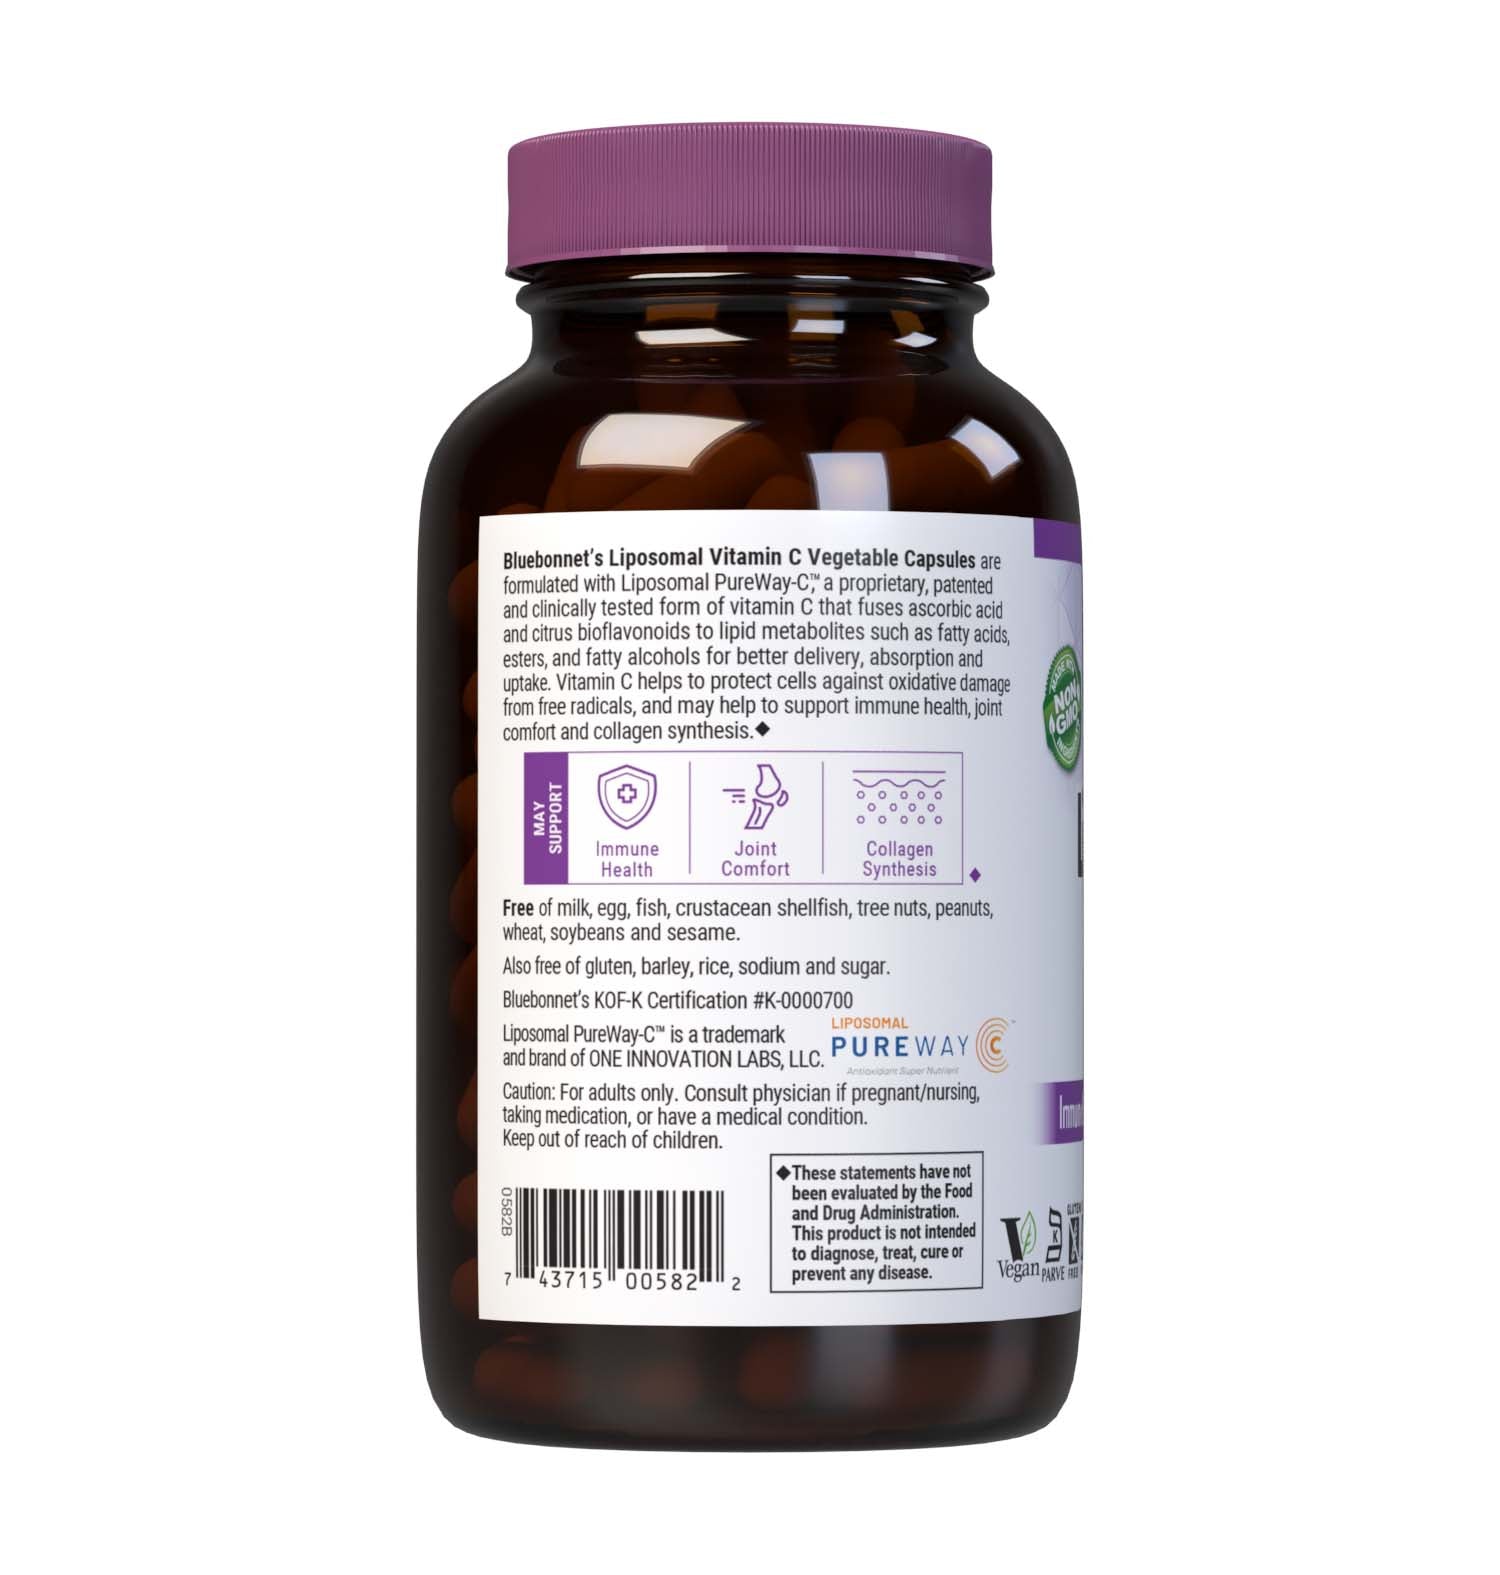 Formulated with Liposomal Pureway-C, 180 Vegetable Capsules a patented and clinically tested form of vitamin C that fuses ascorbic acid and citrus bioflavonoids to lipid metabolites such as fatty acids, esters, and fatty alcohols for better delivery, absorption and uptake to help support immune health, joint comfort & collagen synthesis. Description panel. #size_180 count